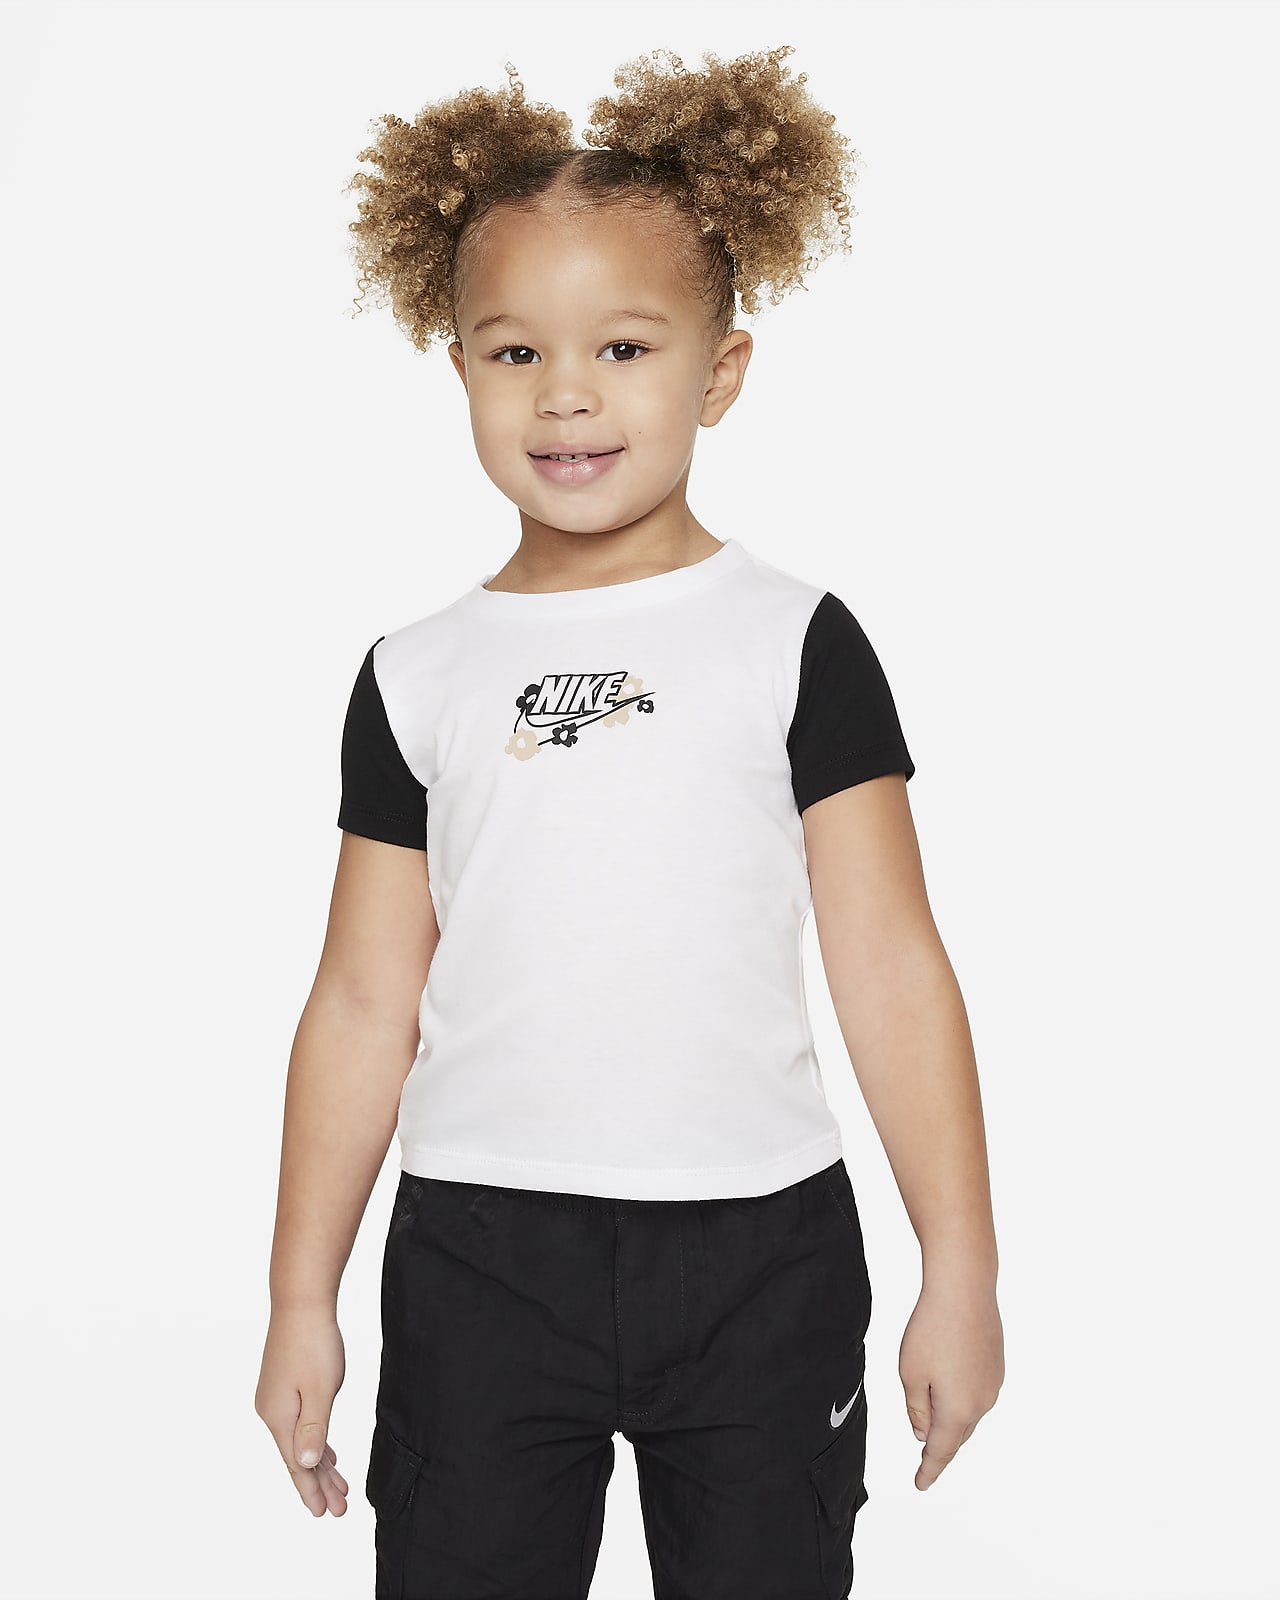 Nike "Your Move" Toddler Graphic T-Shirt